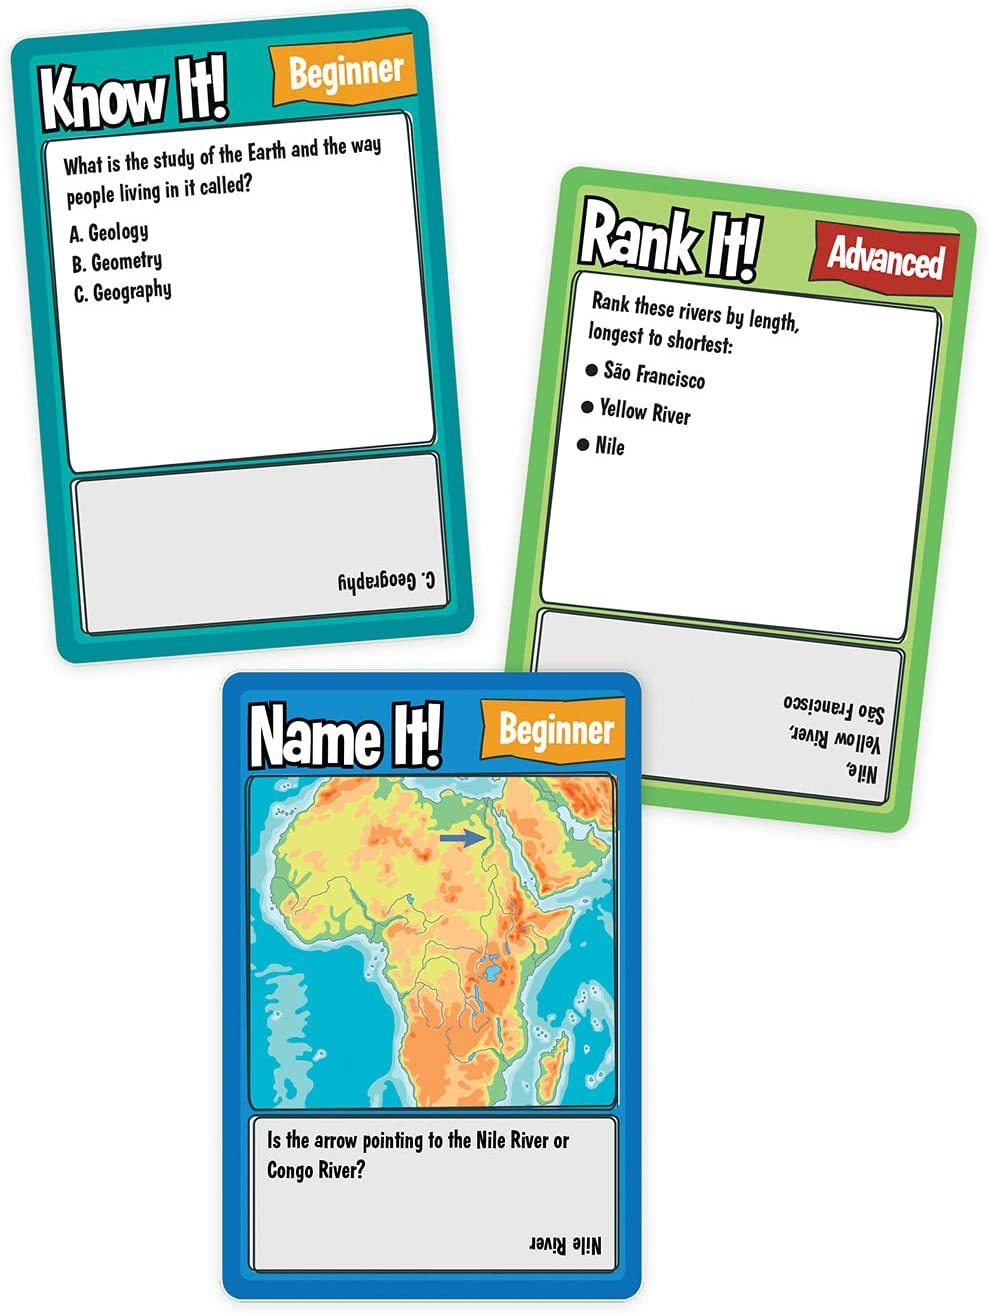 Geography TRIVIA CHALLENGE GAME